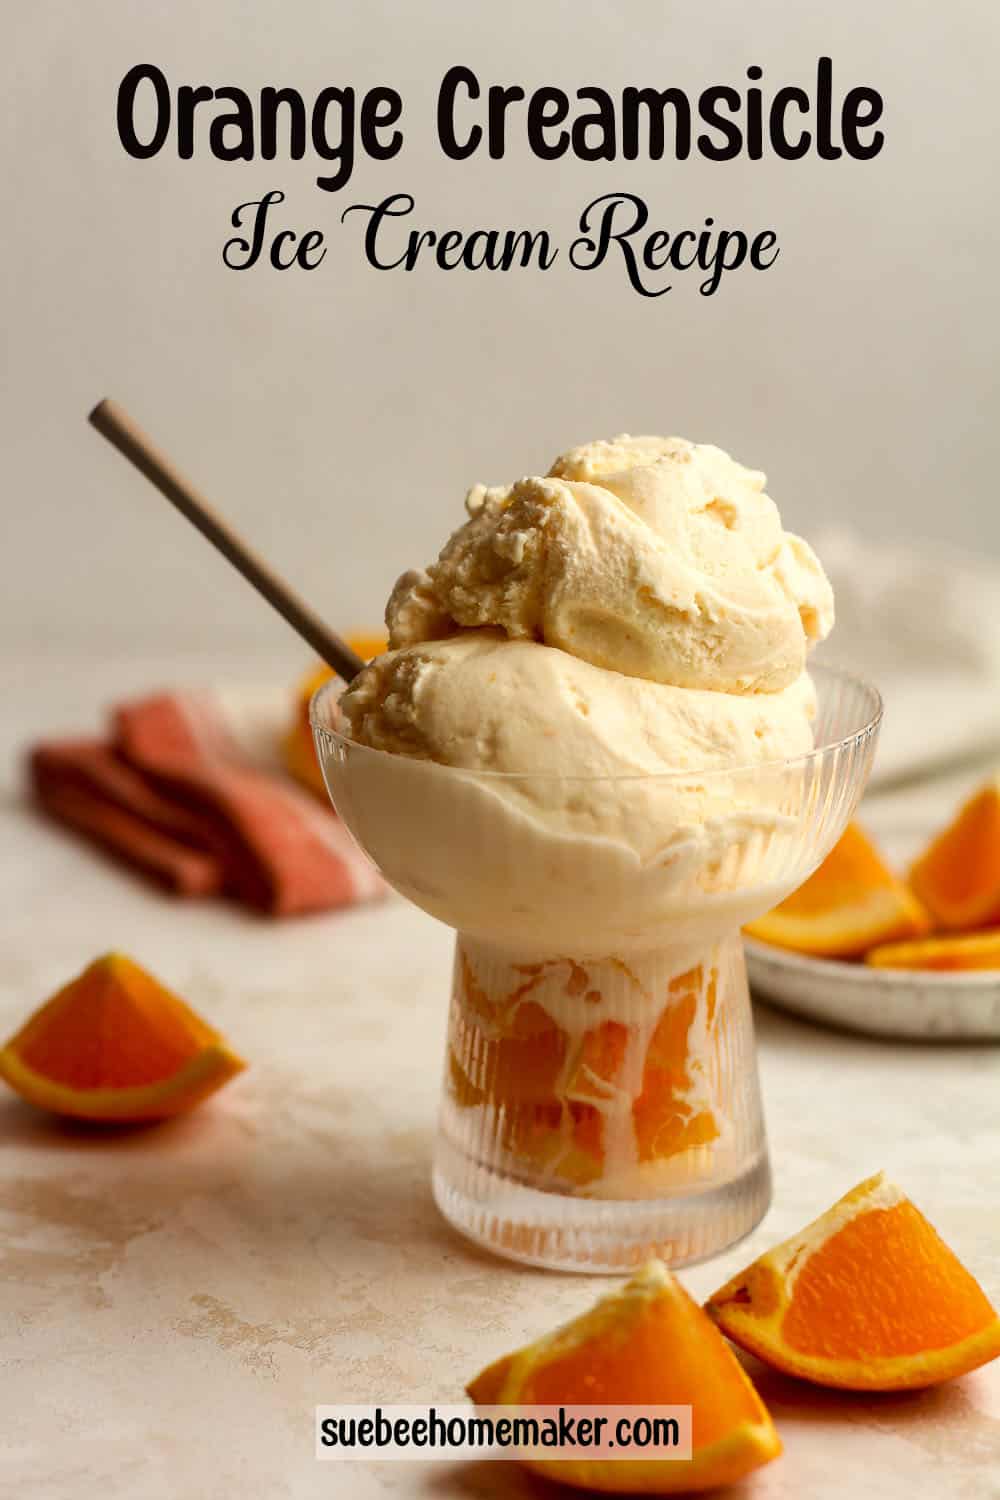 A fancy bowl of orange creamsicle ice cream with a spoon and orange wedges around it.